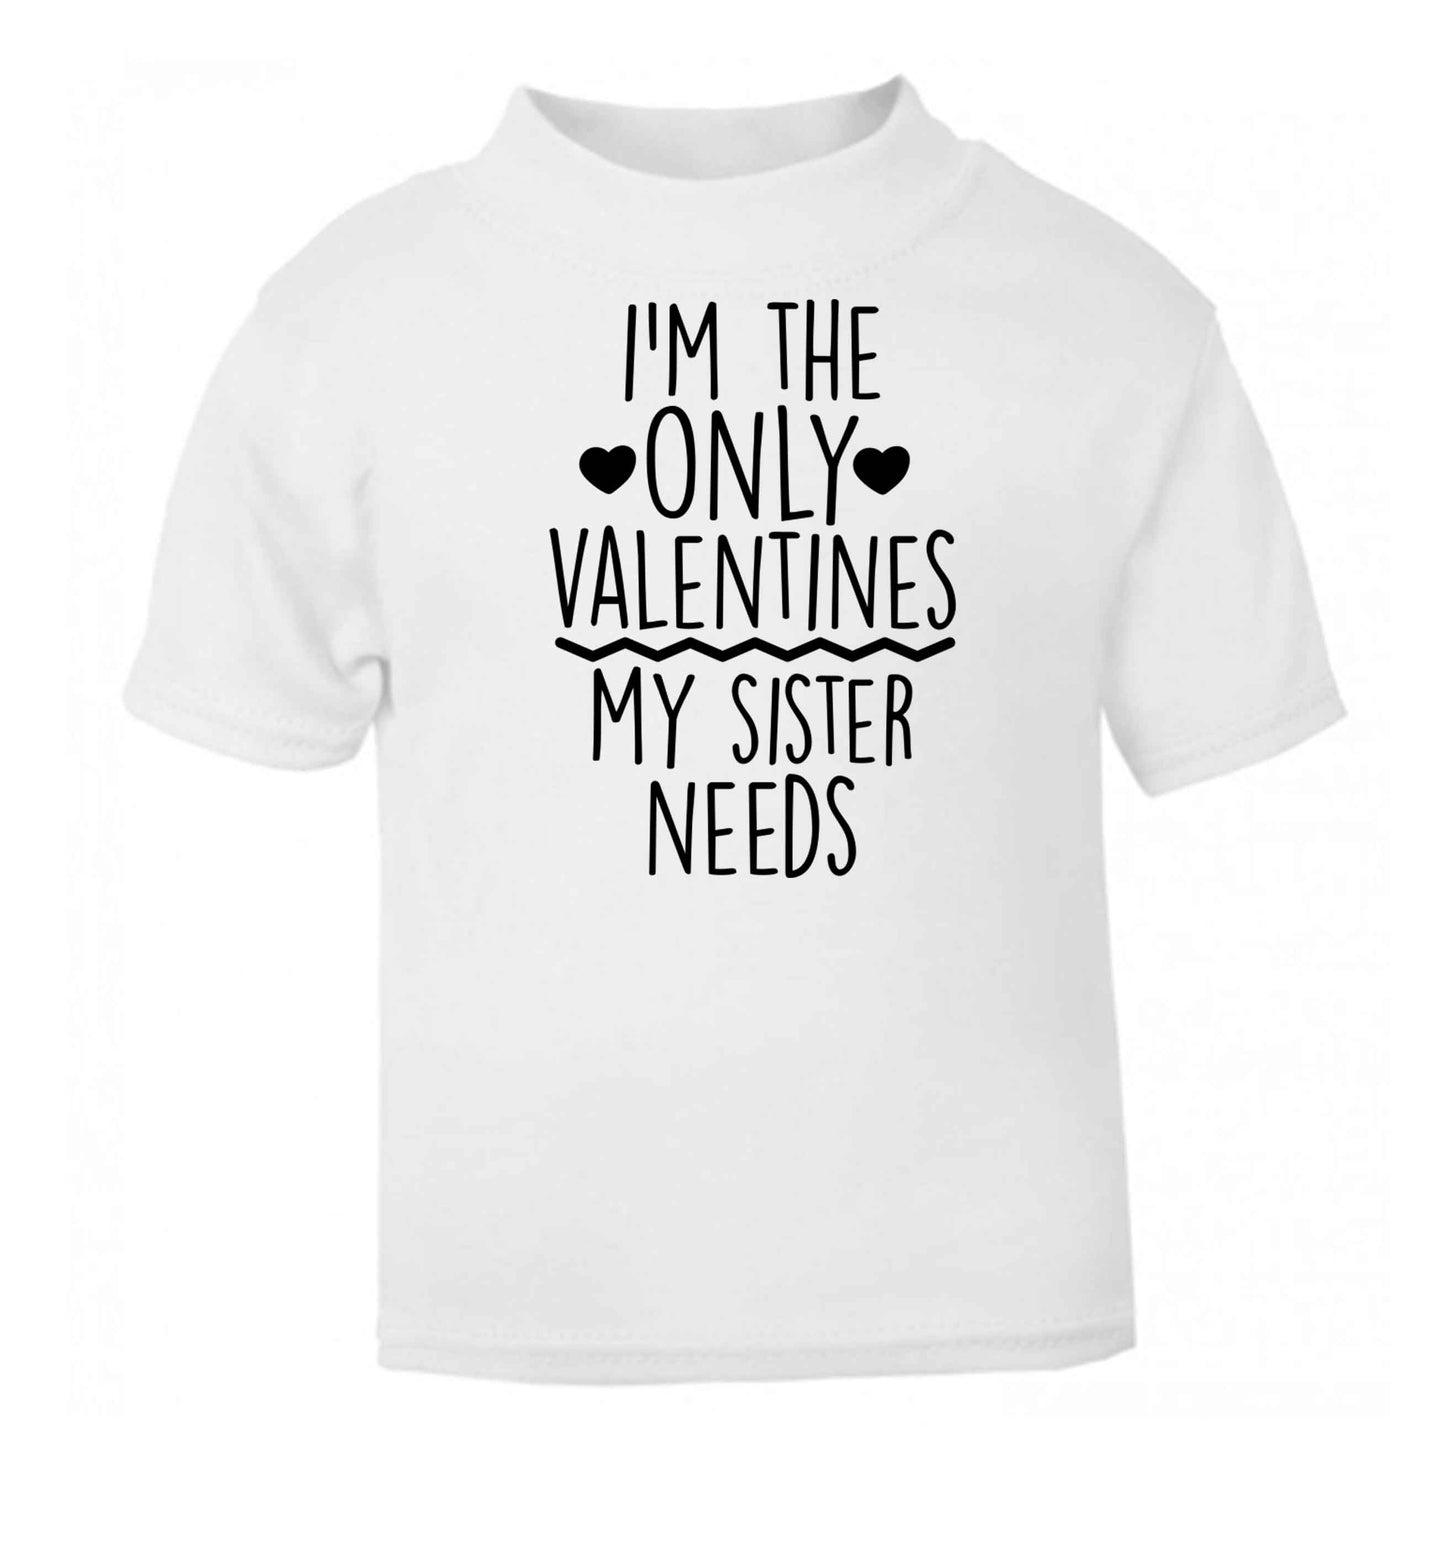 I'm the only valentines my sister needs white baby toddler Tshirt 2 Years